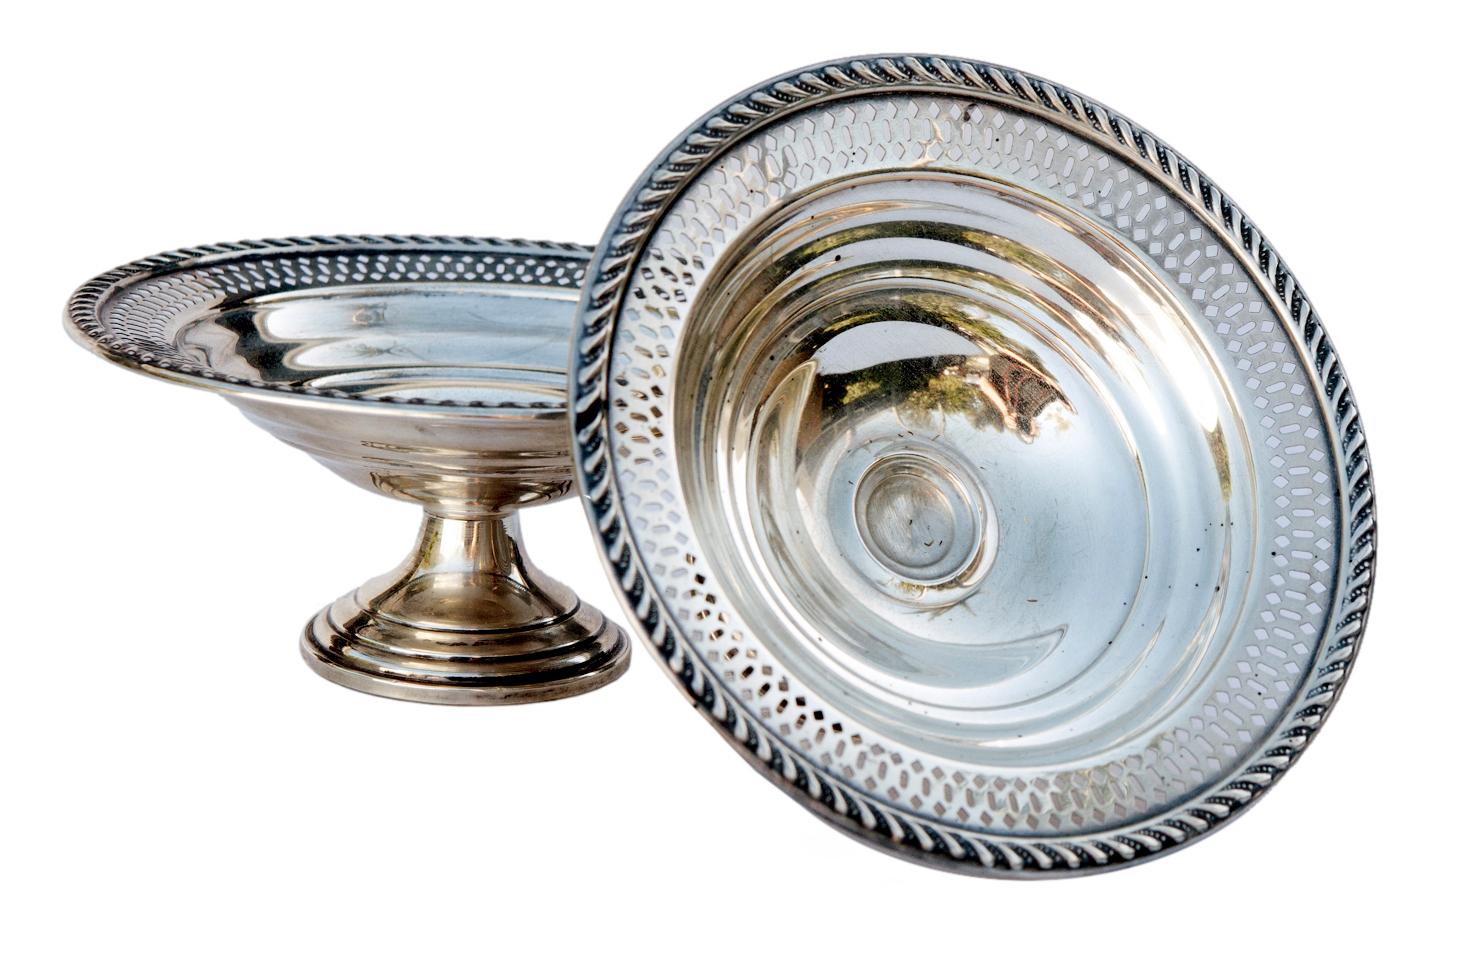 American sterling silver compotes/ candy dishes, very clean & shiny.
Footed with pierced edge, the border finished with a heavy beaded rim & border. feel. The weighted base is simple and unadorned.
Perfect for entertaining, on your coffee table